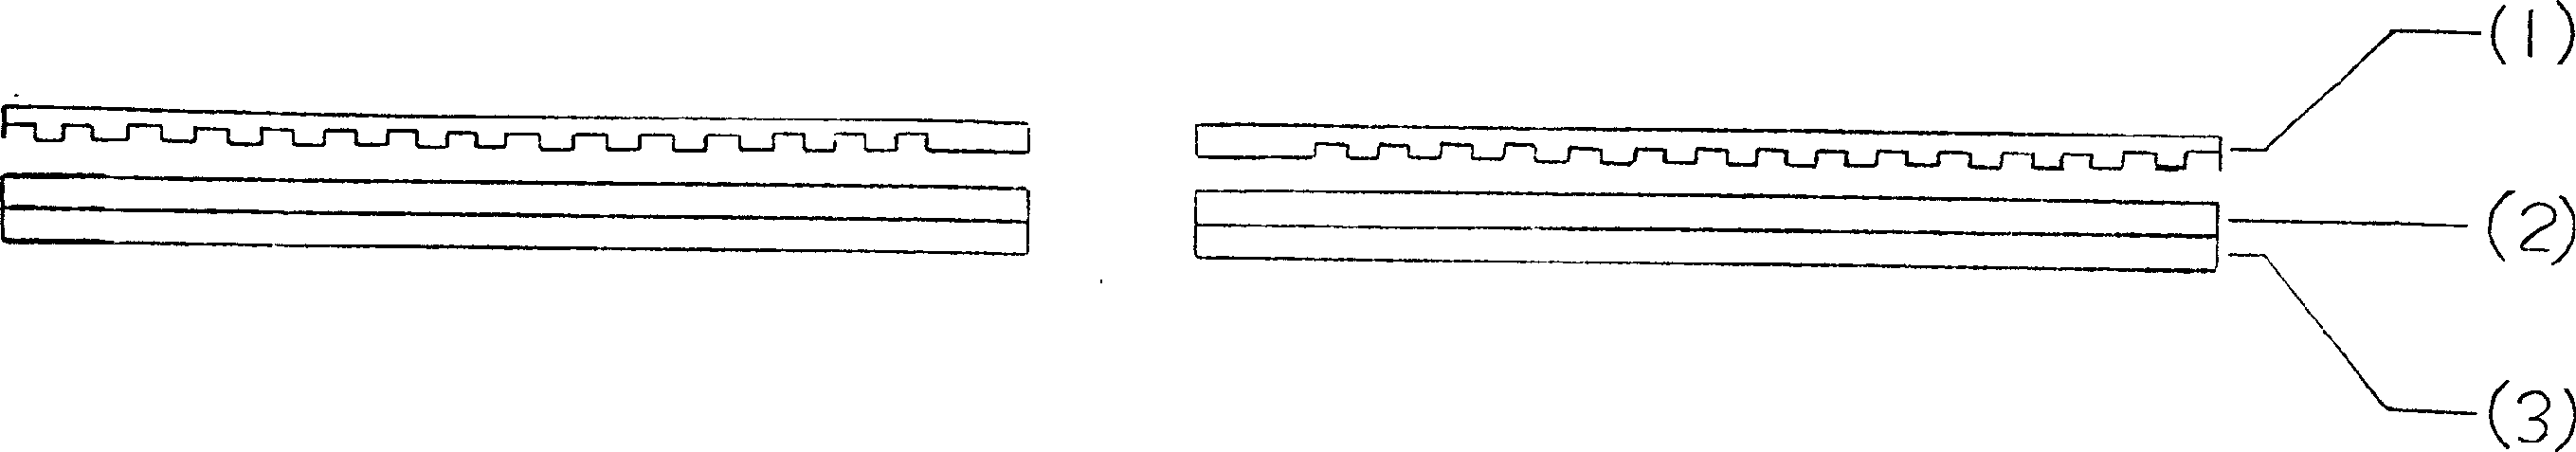 Glass thin layer optic disk structure and process